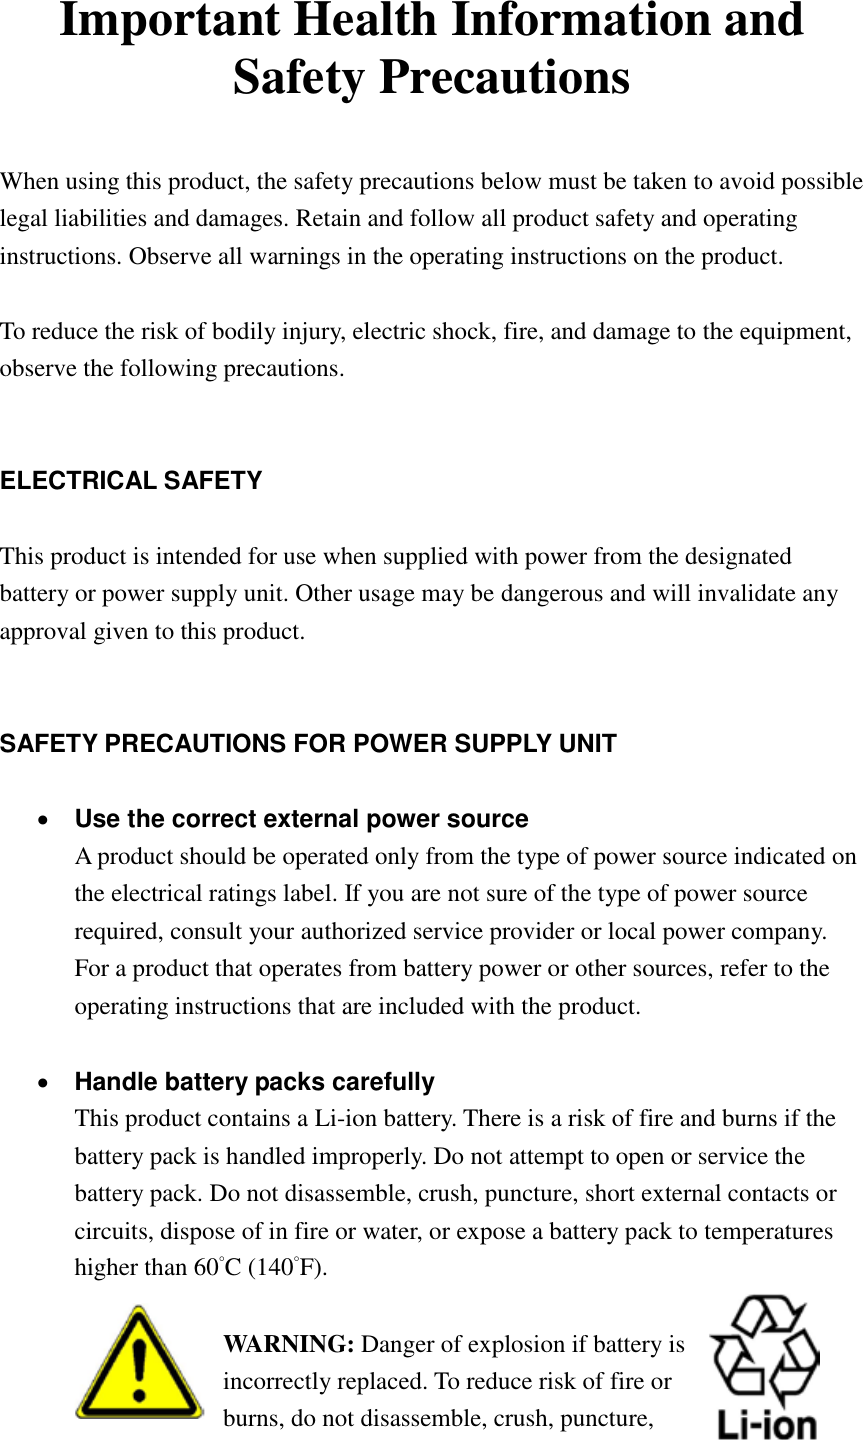 Important Health Information and Safety Precautions  When using this product, the safety precautions below must be taken to avoid possible legal liabilities and damages. Retain and follow all product safety and operating instructions. Observe all warnings in the operating instructions on the product.    To reduce the risk of bodily injury, electric shock, fire, and damage to the equipment, observe the following precautions.   ELECTRICAL SAFETY  This product is intended for use when supplied with power from the designated battery or power supply unit. Other usage may be dangerous and will invalidate any approval given to this product.   SAFETY PRECAUTIONS FOR POWER SUPPLY UNIT   Use the correct external power source A product should be operated only from the type of power source indicated on the electrical ratings label. If you are not sure of the type of power source required, consult your authorized service provider or local power company. For a product that operates from battery power or other sources, refer to the operating instructions that are included with the product.   Handle battery packs carefully This product contains a Li-ion battery. There is a risk of fire and burns if the battery pack is handled improperly. Do not attempt to open or service the battery pack. Do not disassemble, crush, puncture, short external contacts or circuits, dispose of in fire or water, or expose a battery pack to temperatures higher than 60˚C (140˚F).  WARNING: Danger of explosion if battery is incorrectly replaced. To reduce risk of fire or burns, do not disassemble, crush, puncture, 